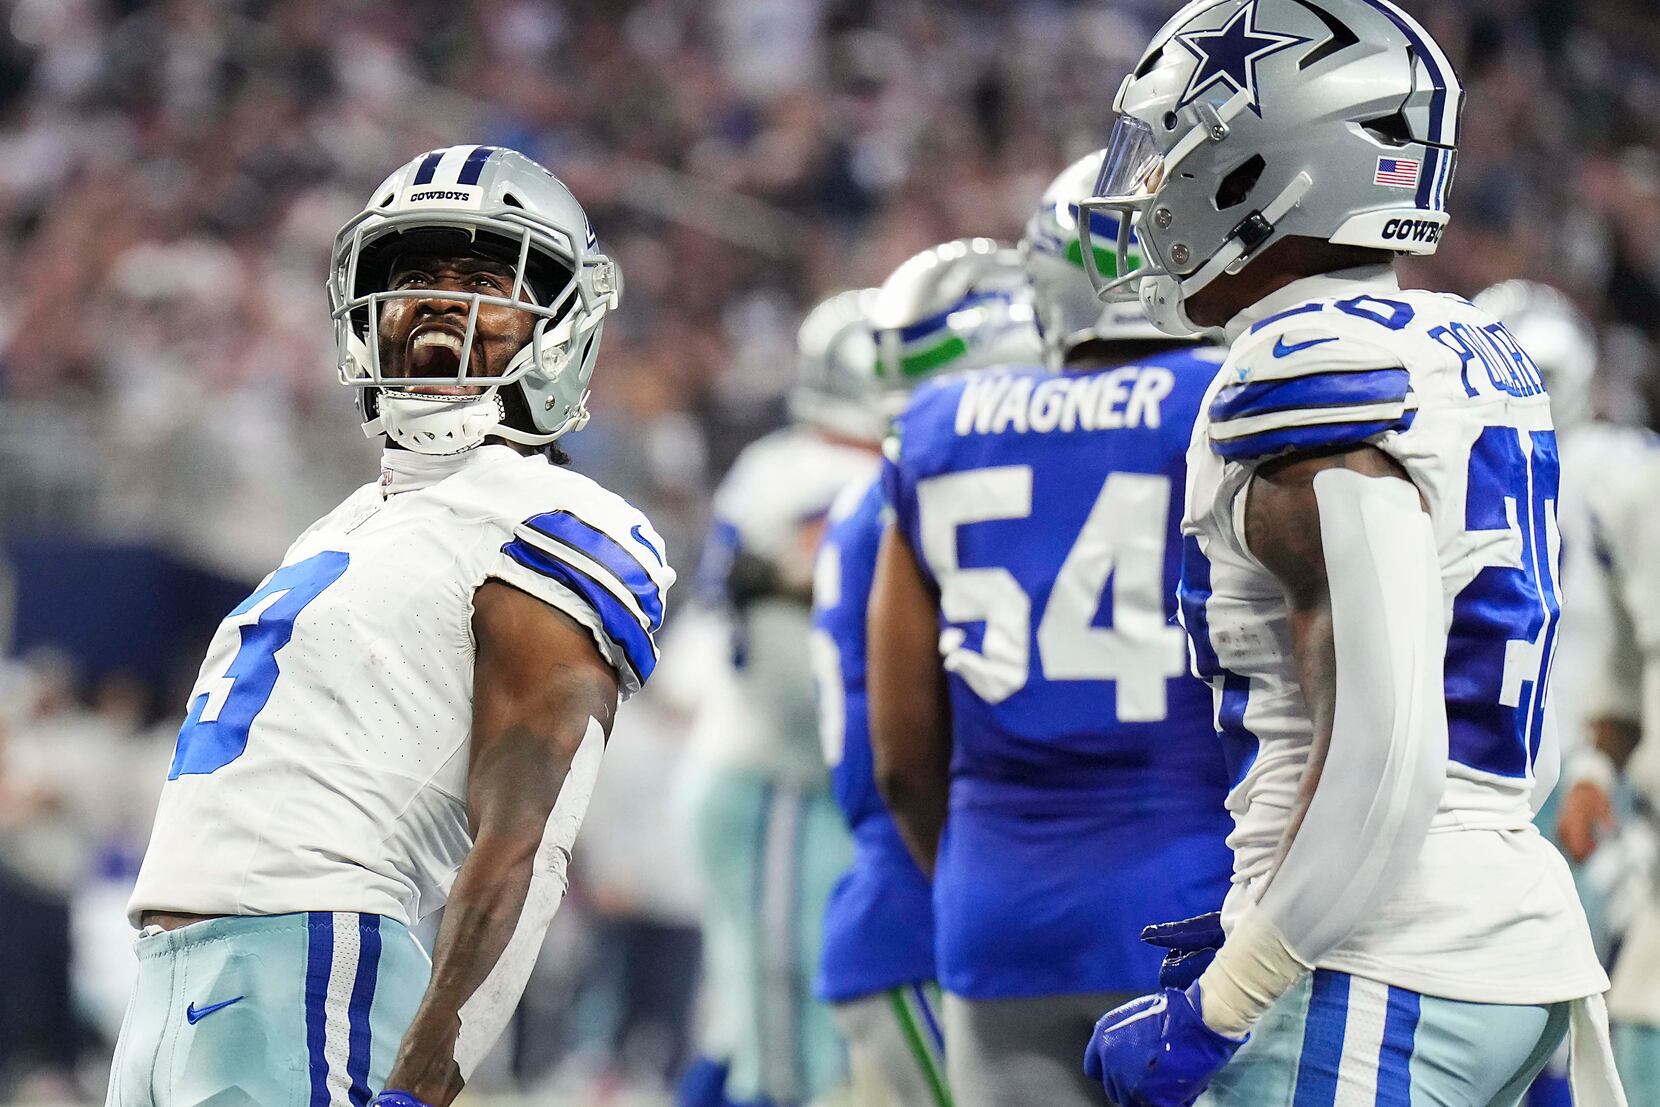 How to Watch NFL Playoffs Online Free: Seahawks vs. Cowboys